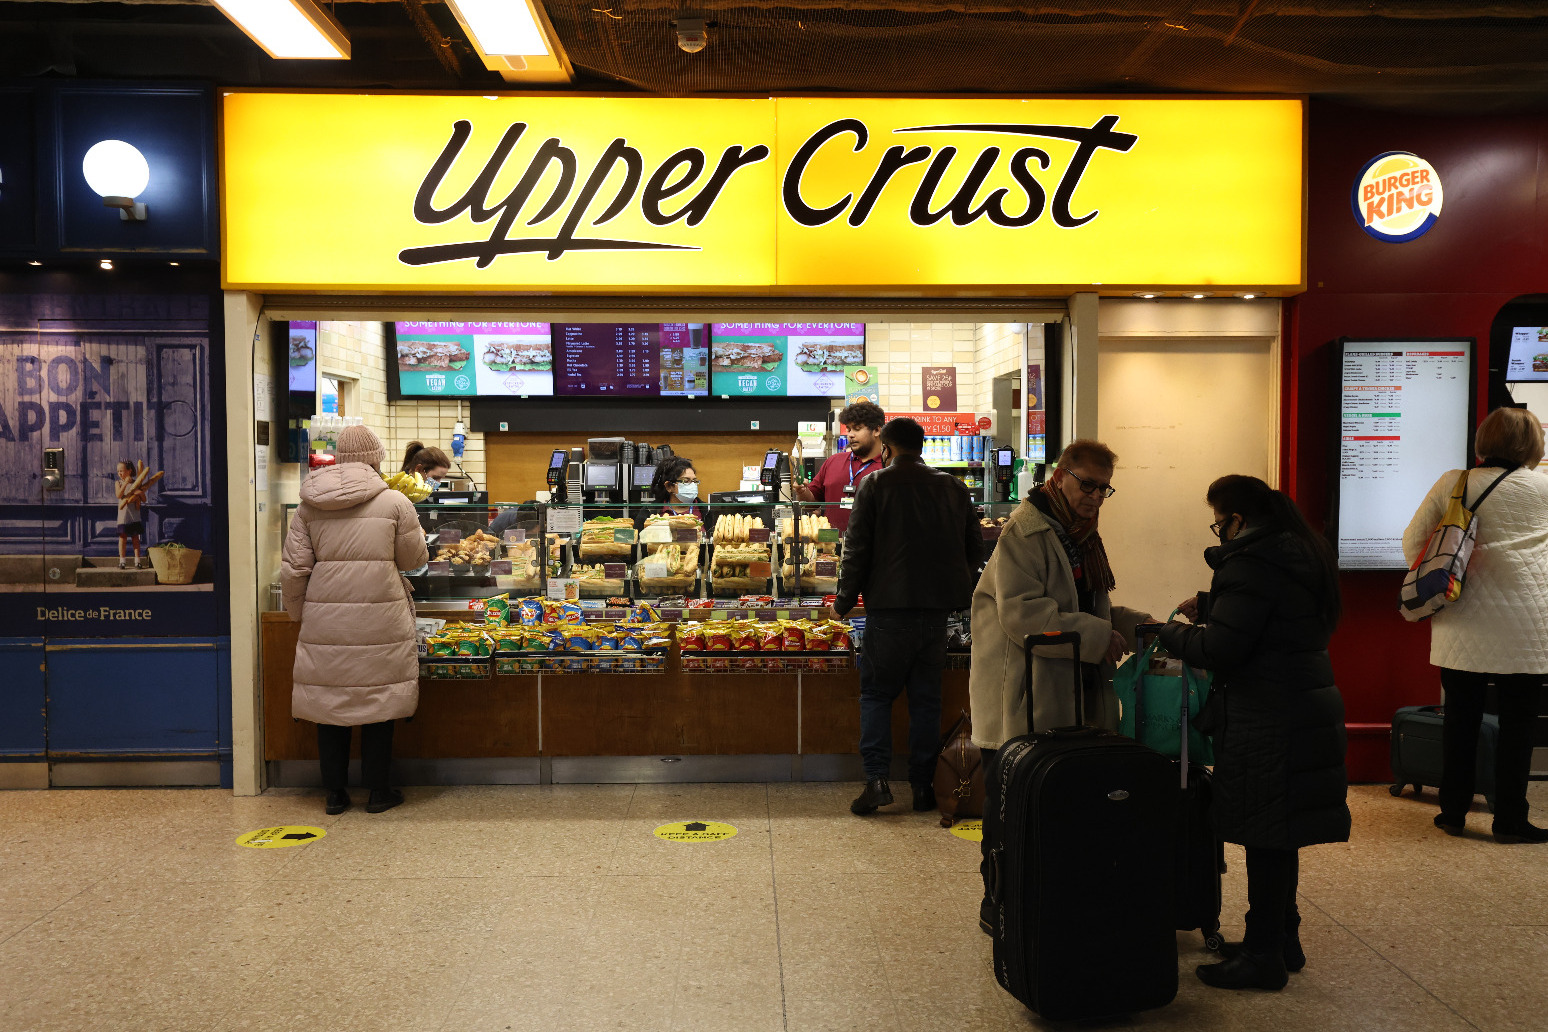 Upper Crust owner SSP’s January trade hit by Omicron spread 